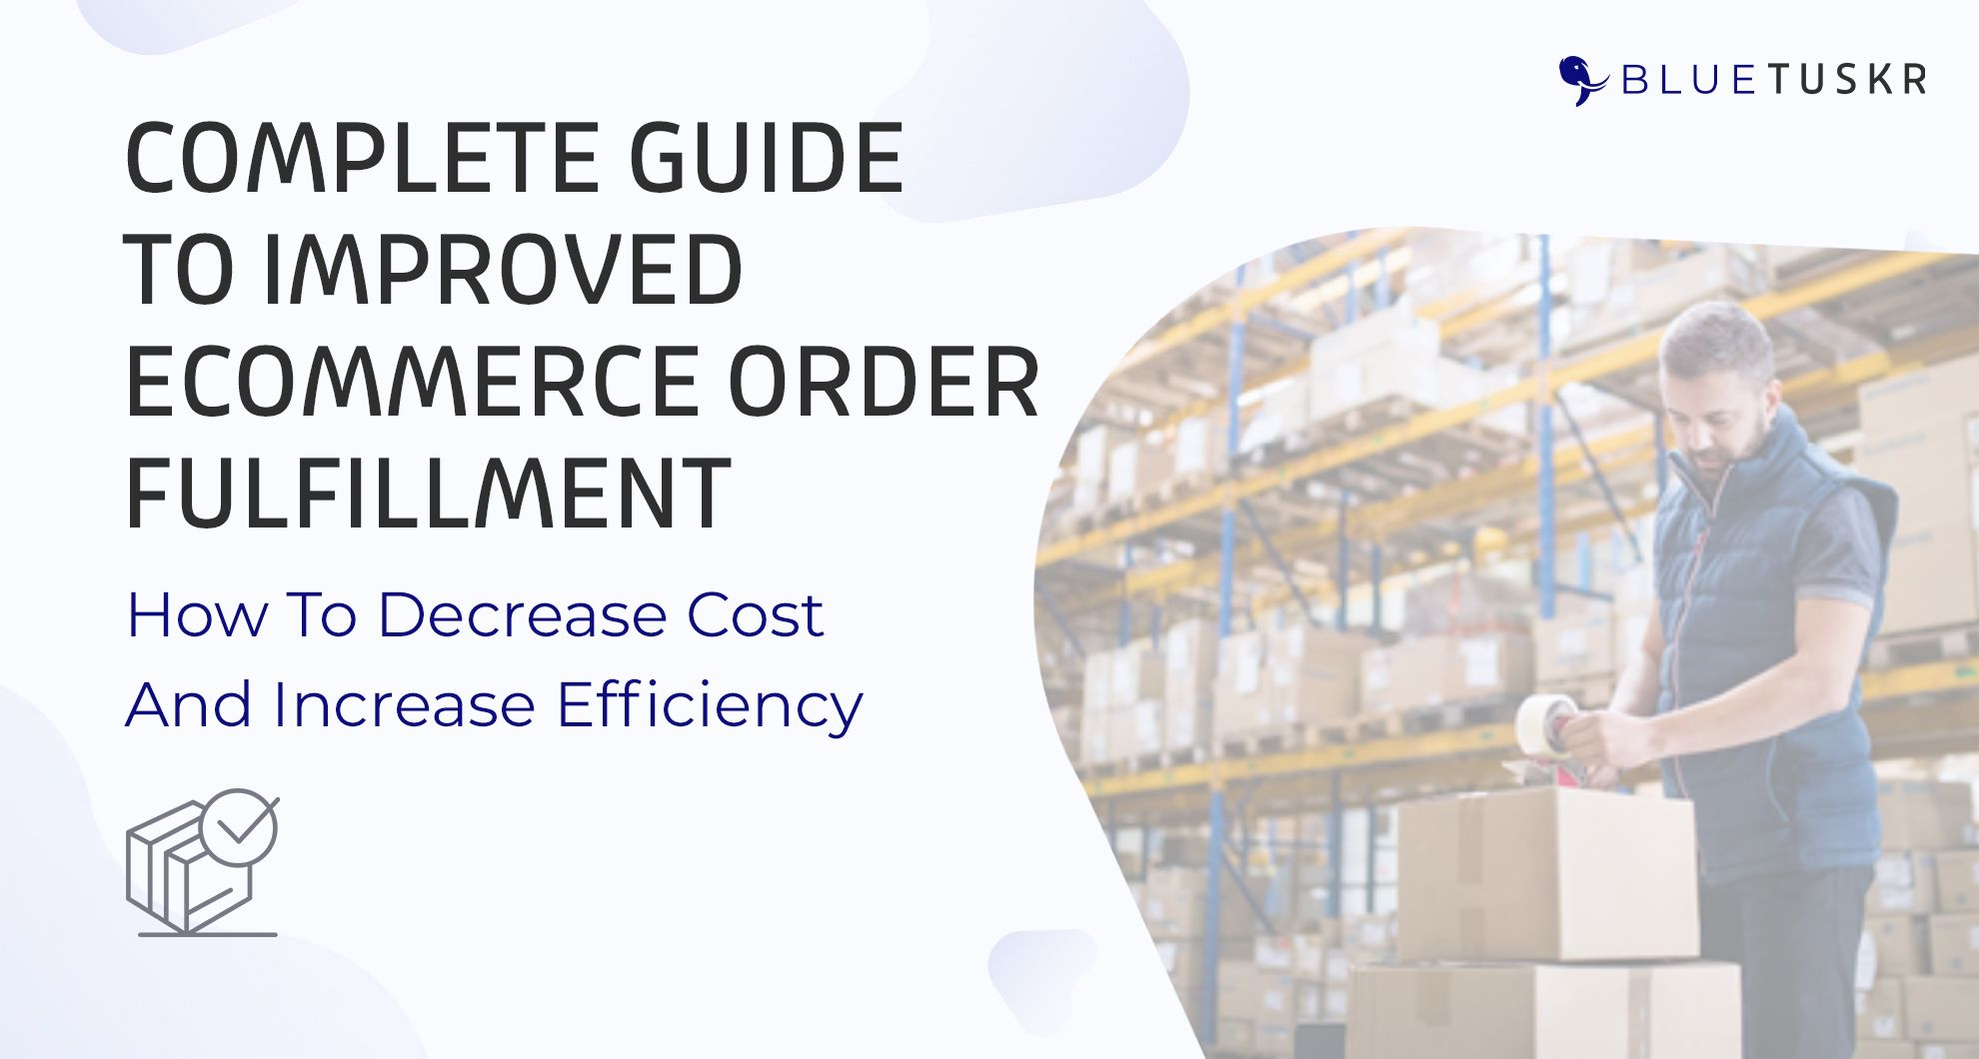 Complete Guide to Improved eCommerce Order Fulfillment: How to decrease costs and increase efficiency